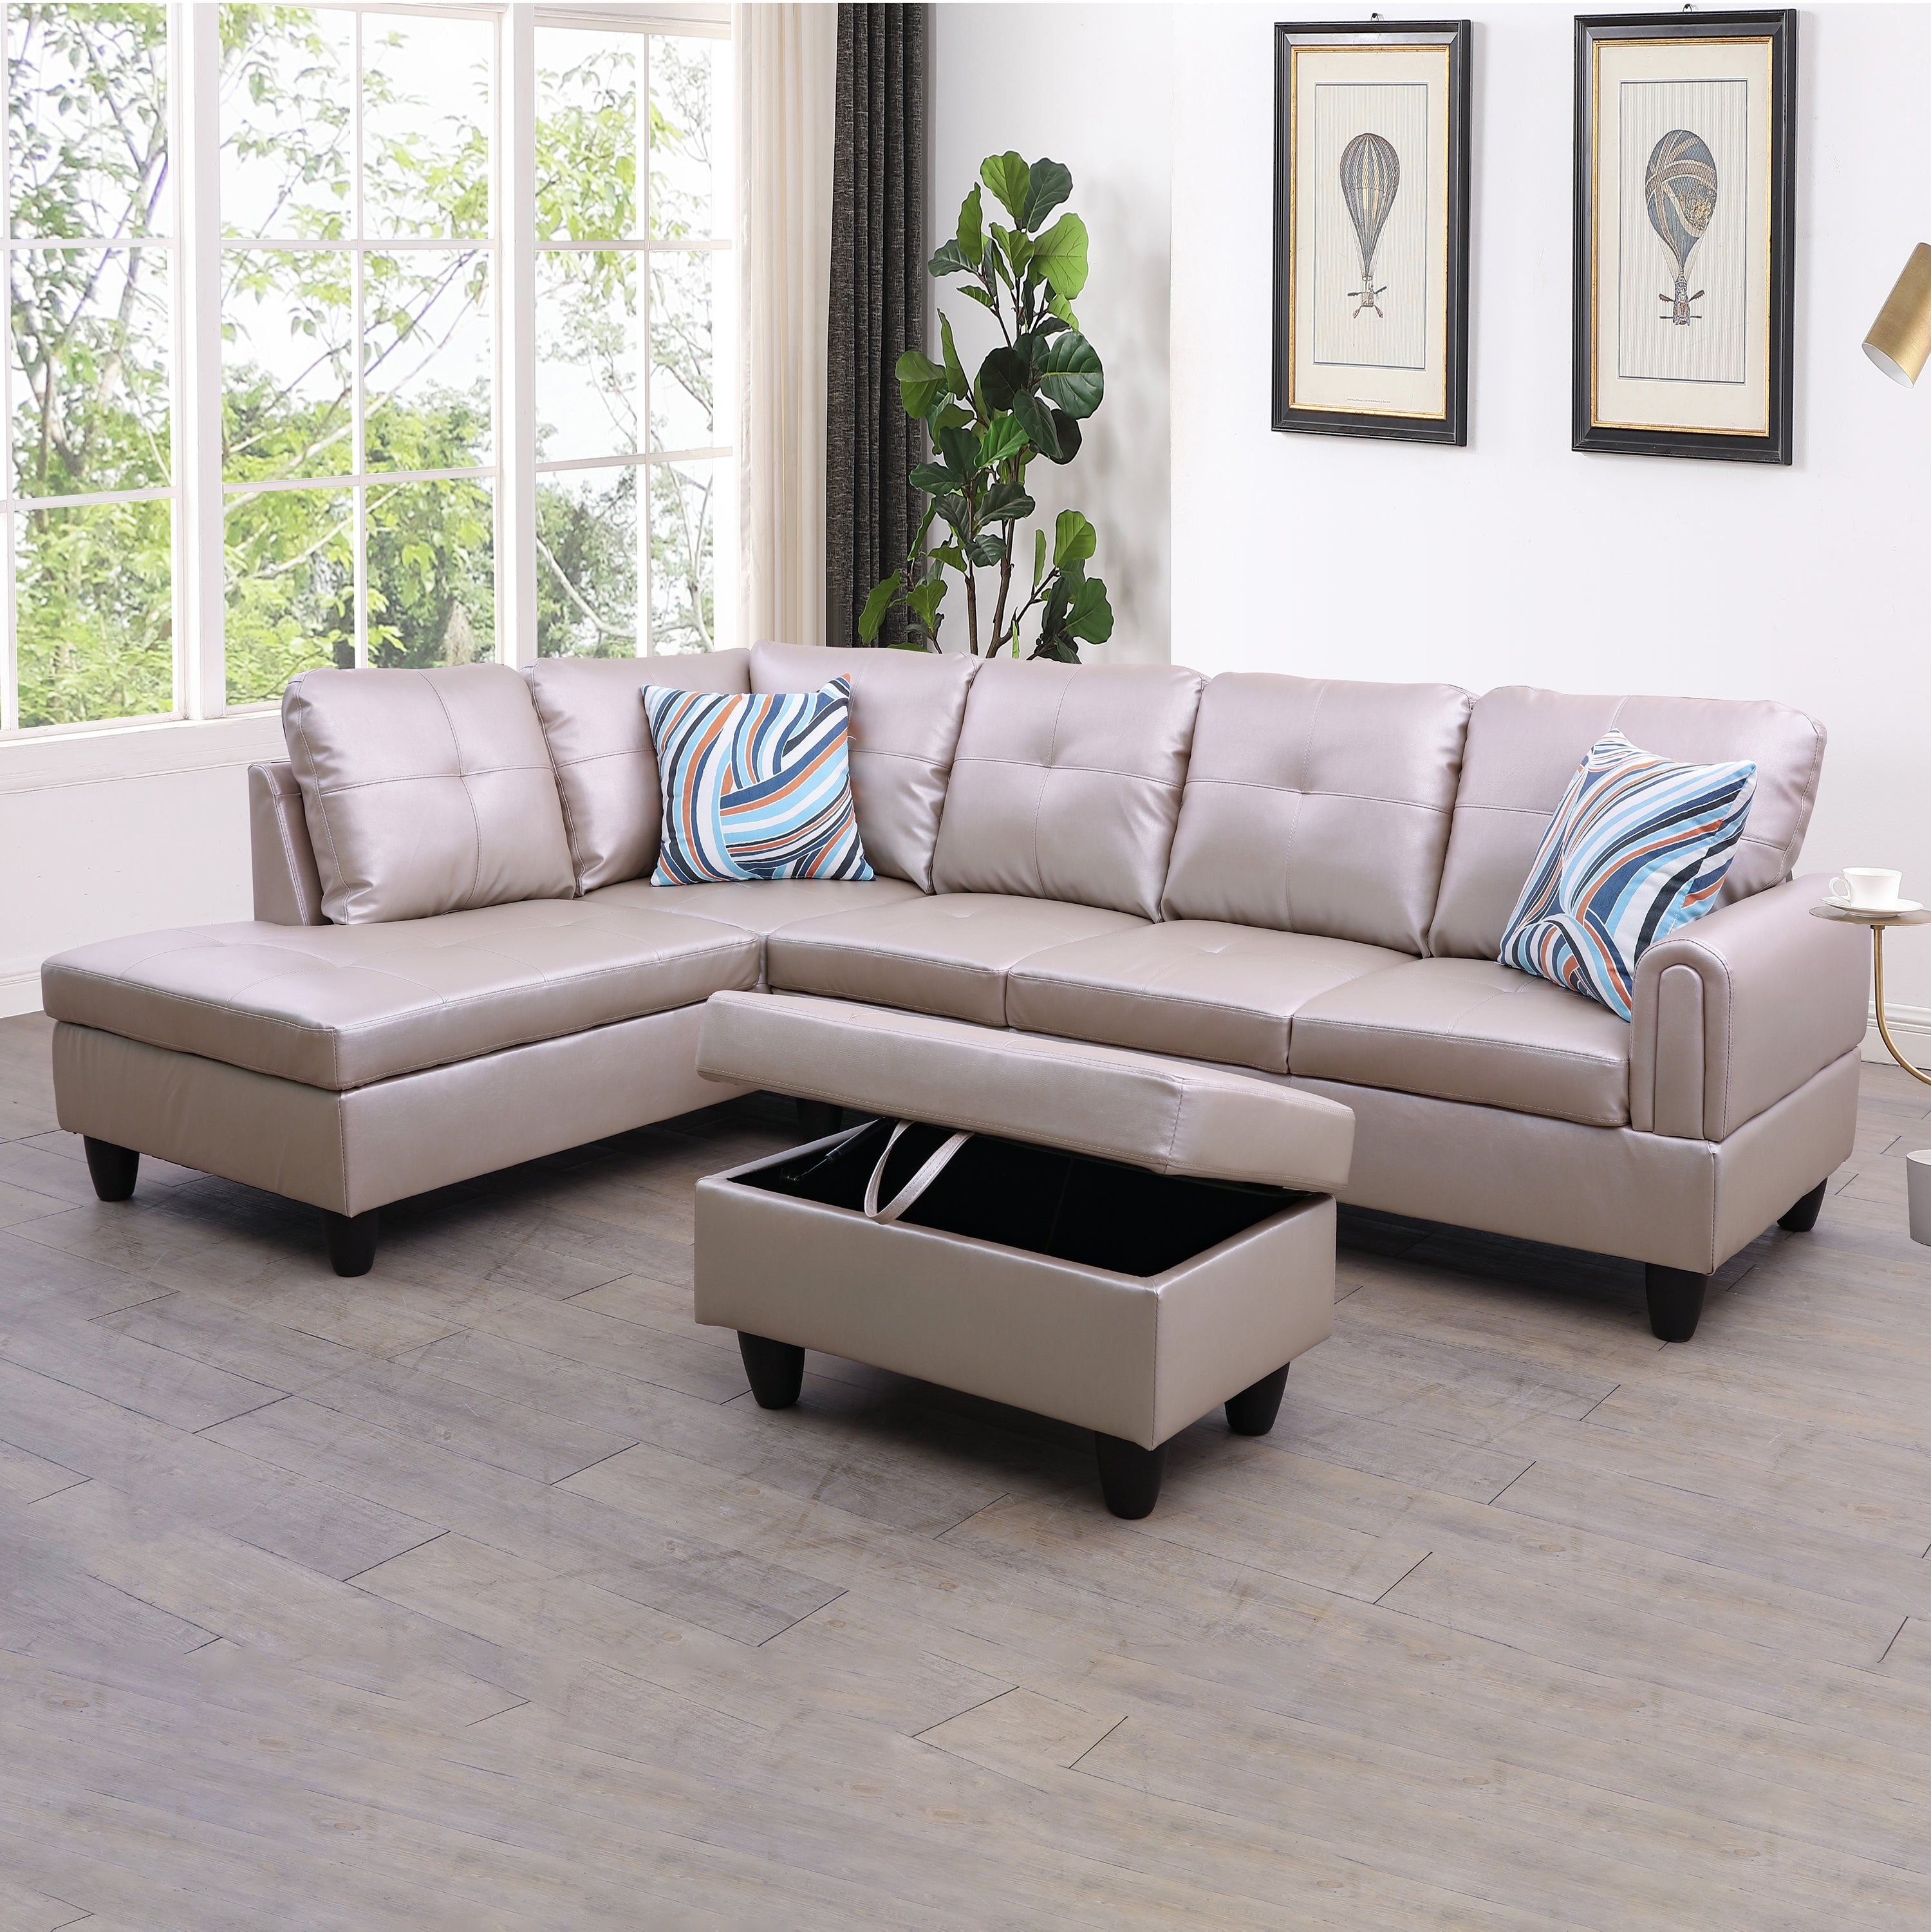 Ainehome Latte Faux Leather Living Room Sofa Set